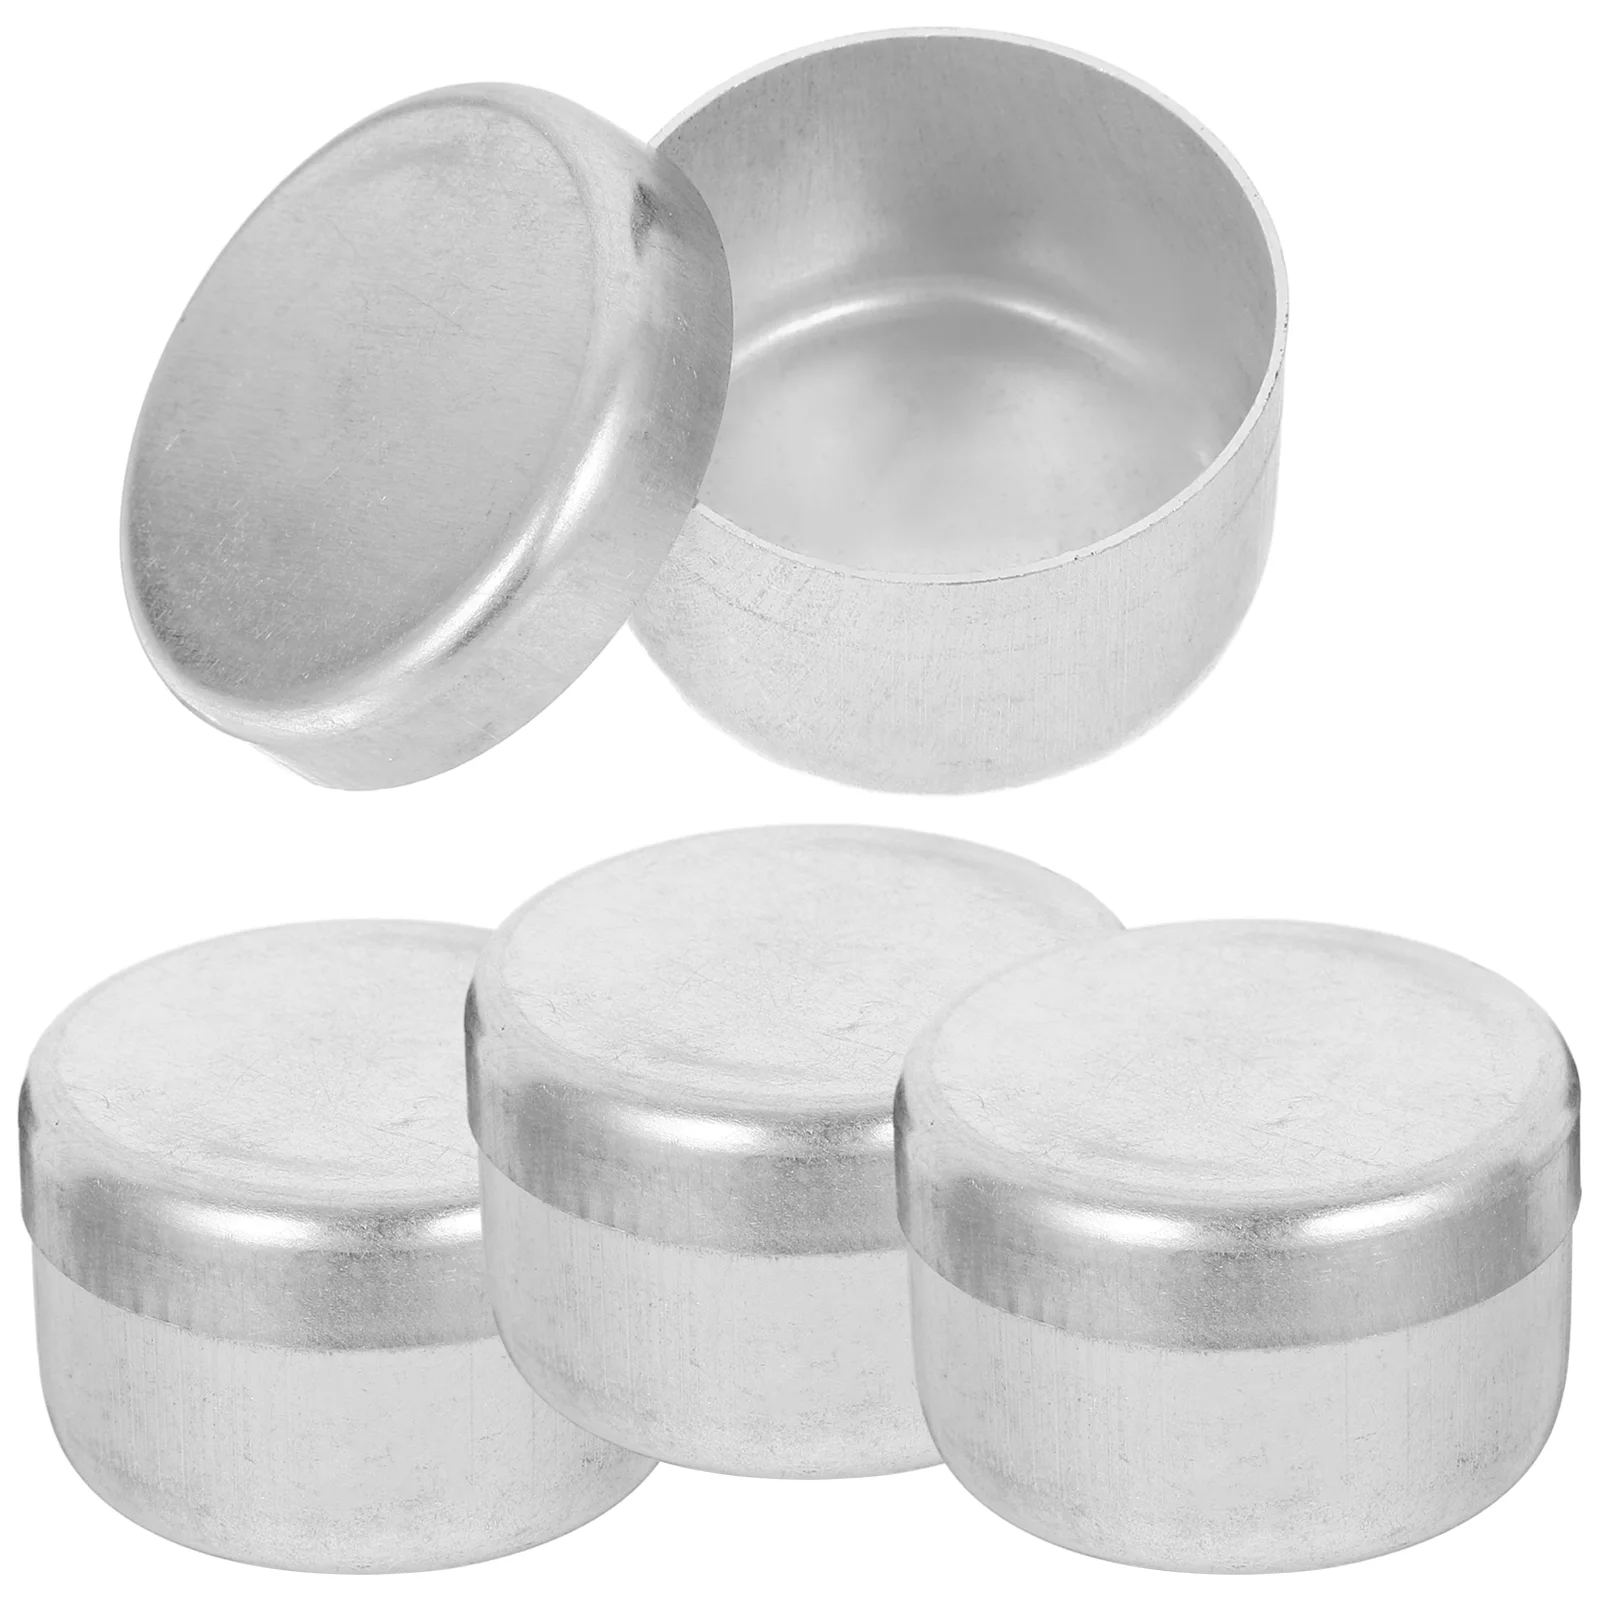 

Soil Sampling Box Small Sample Jars Weighing Holders Tiny Containers with Lids Aluminum Soil Boxes